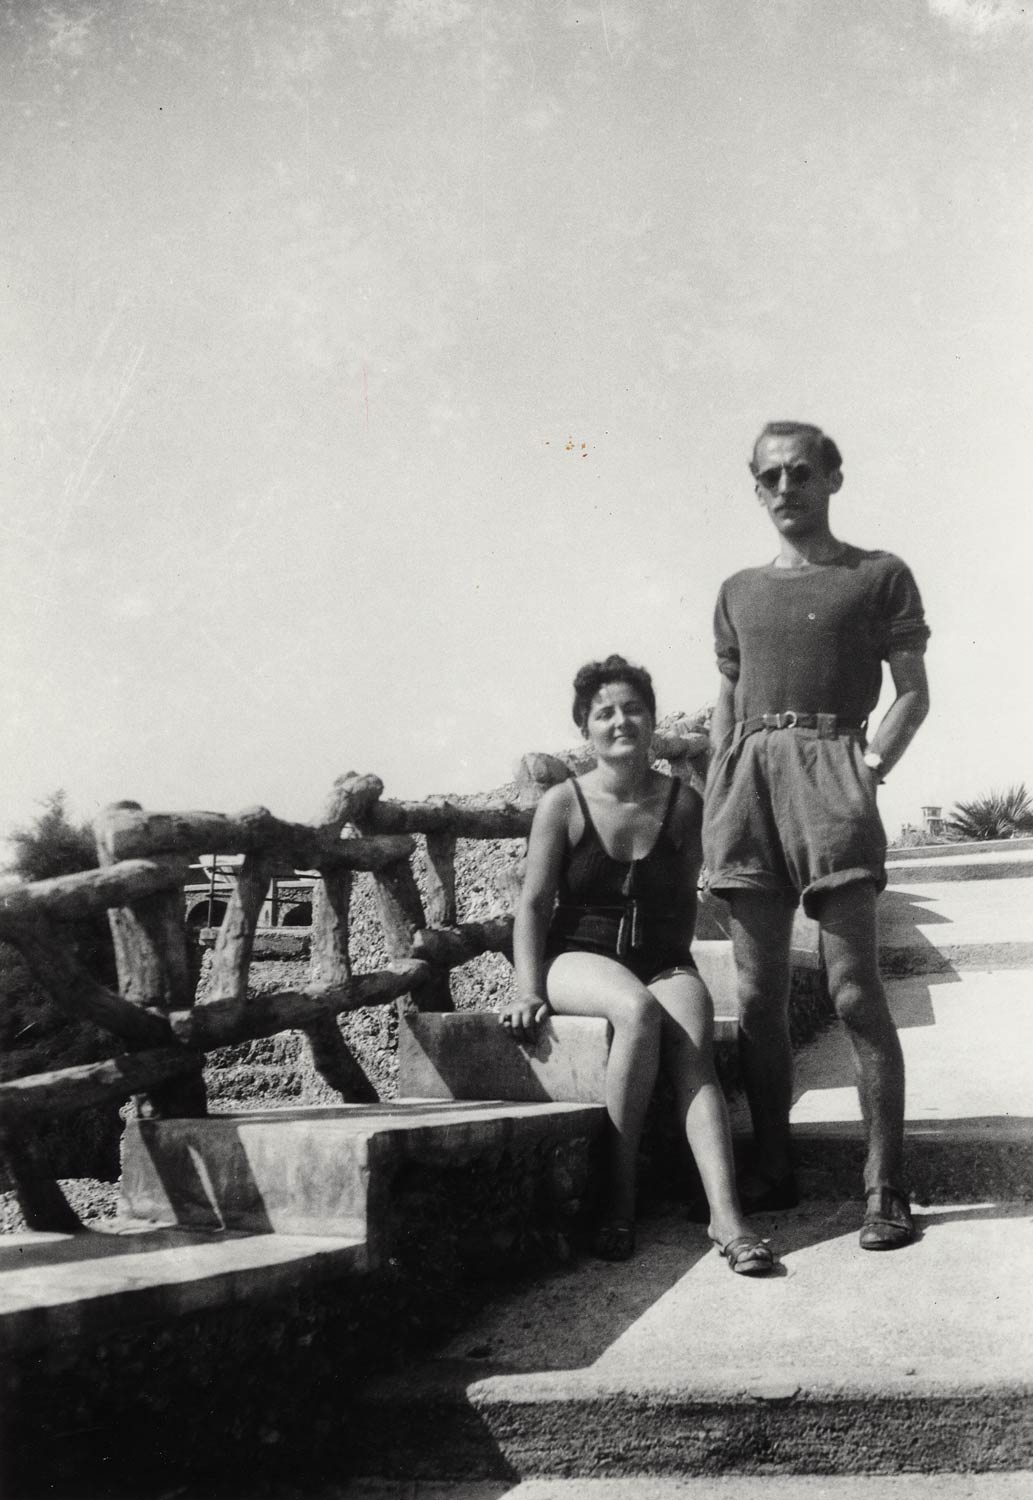 Steinberg with Ada Ongari, c. 1937-38. Saul Steinberg Papers, Beinecke Rare Book and Manuscript Library, Yale University.